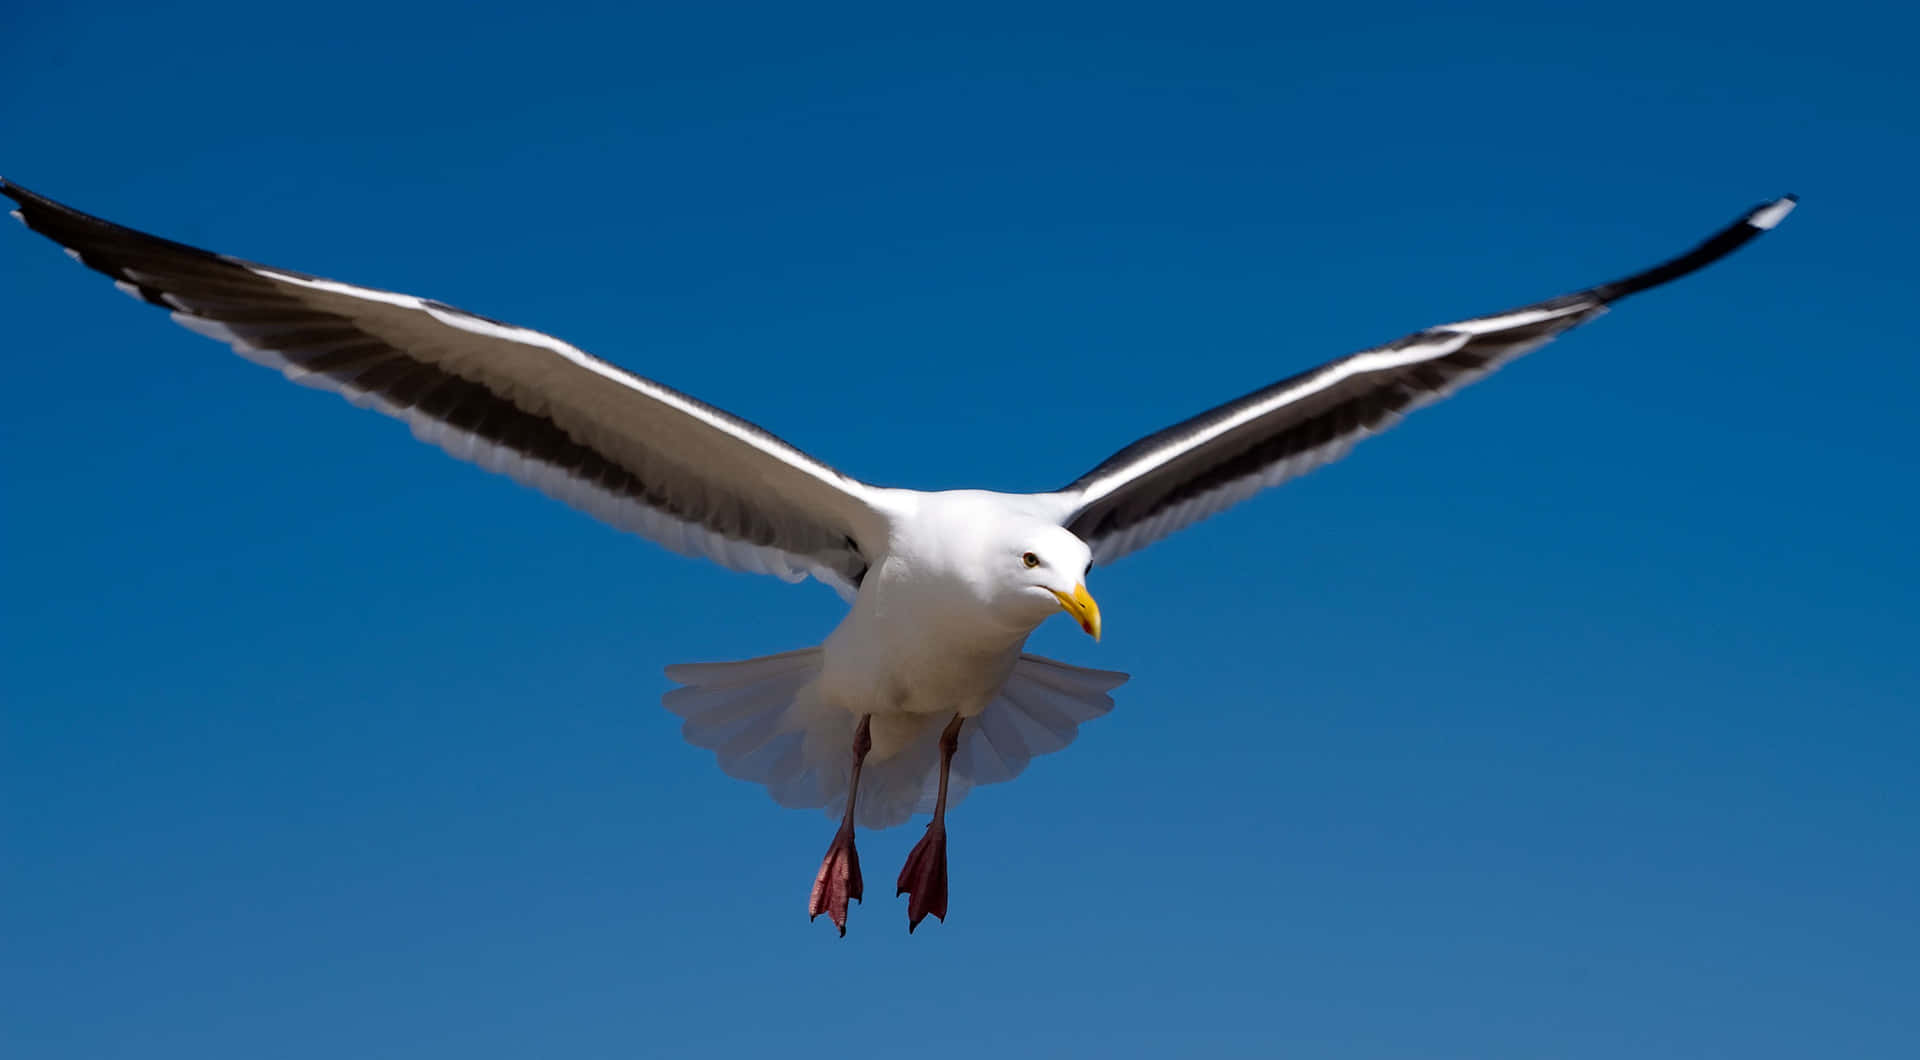 A Beautiful Seagull Soaring Above The Ocean Waves